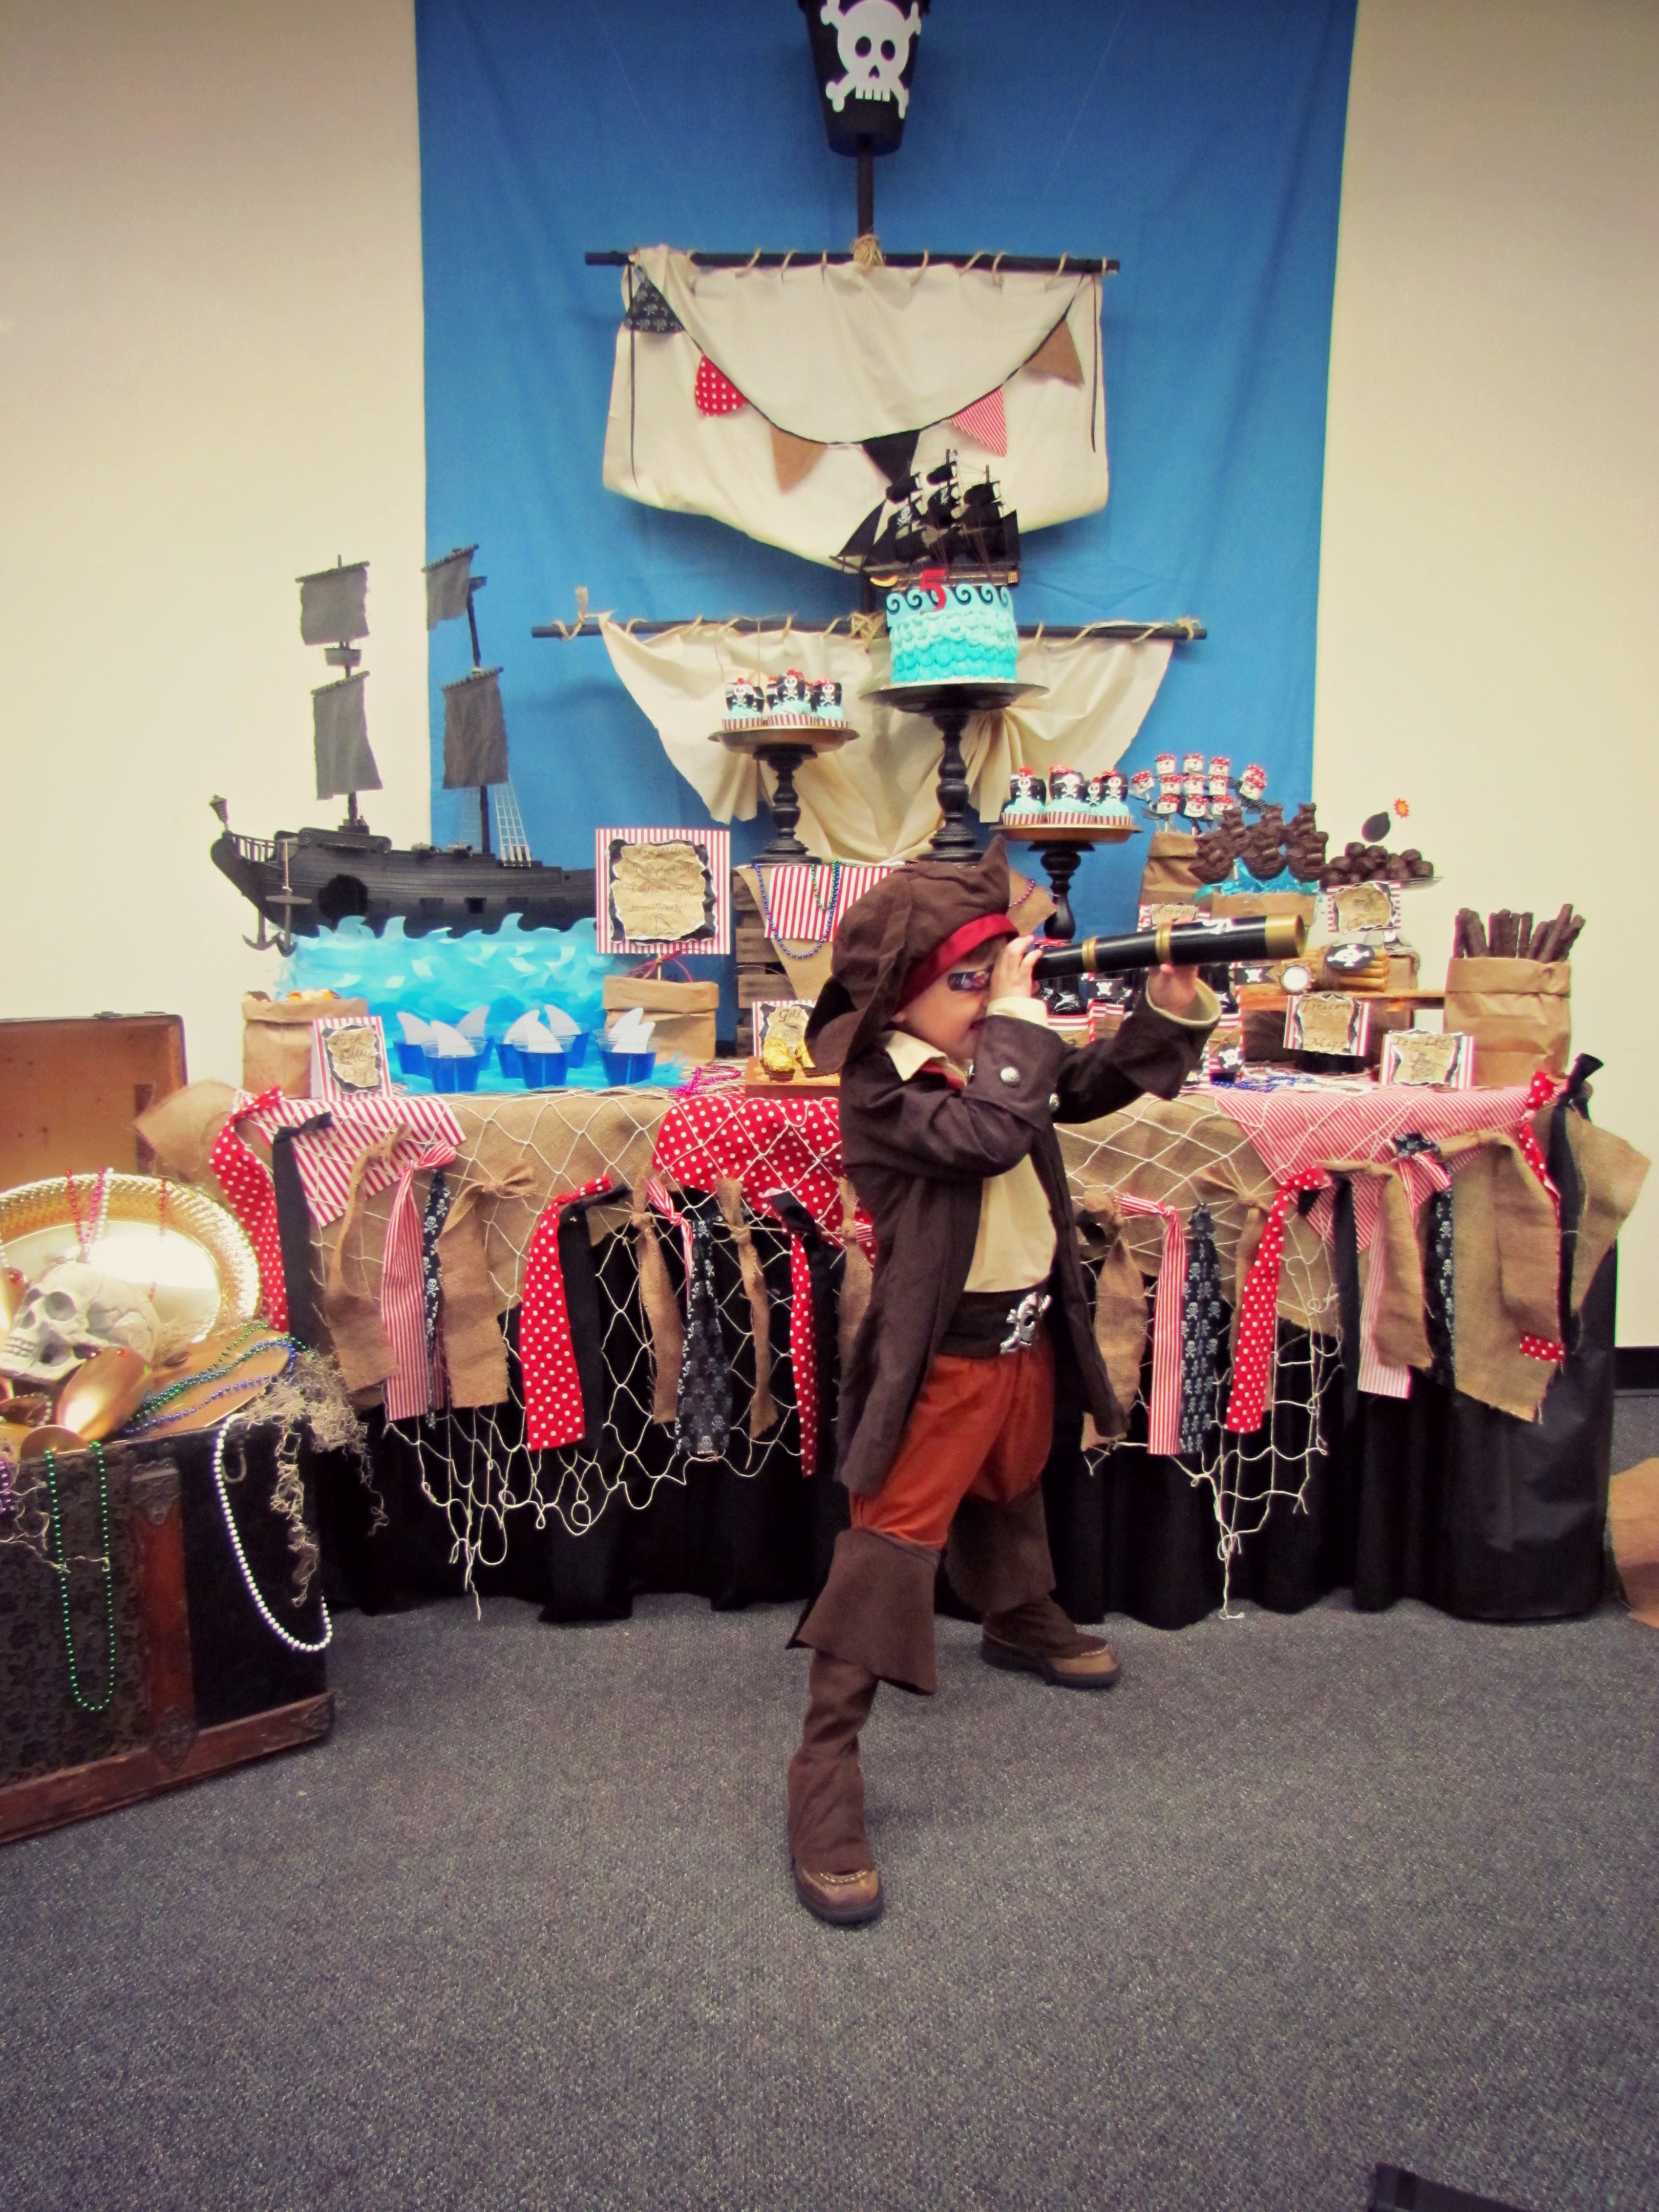 Captain Arron's Pirate Themed Birthday Party - Project Nursery